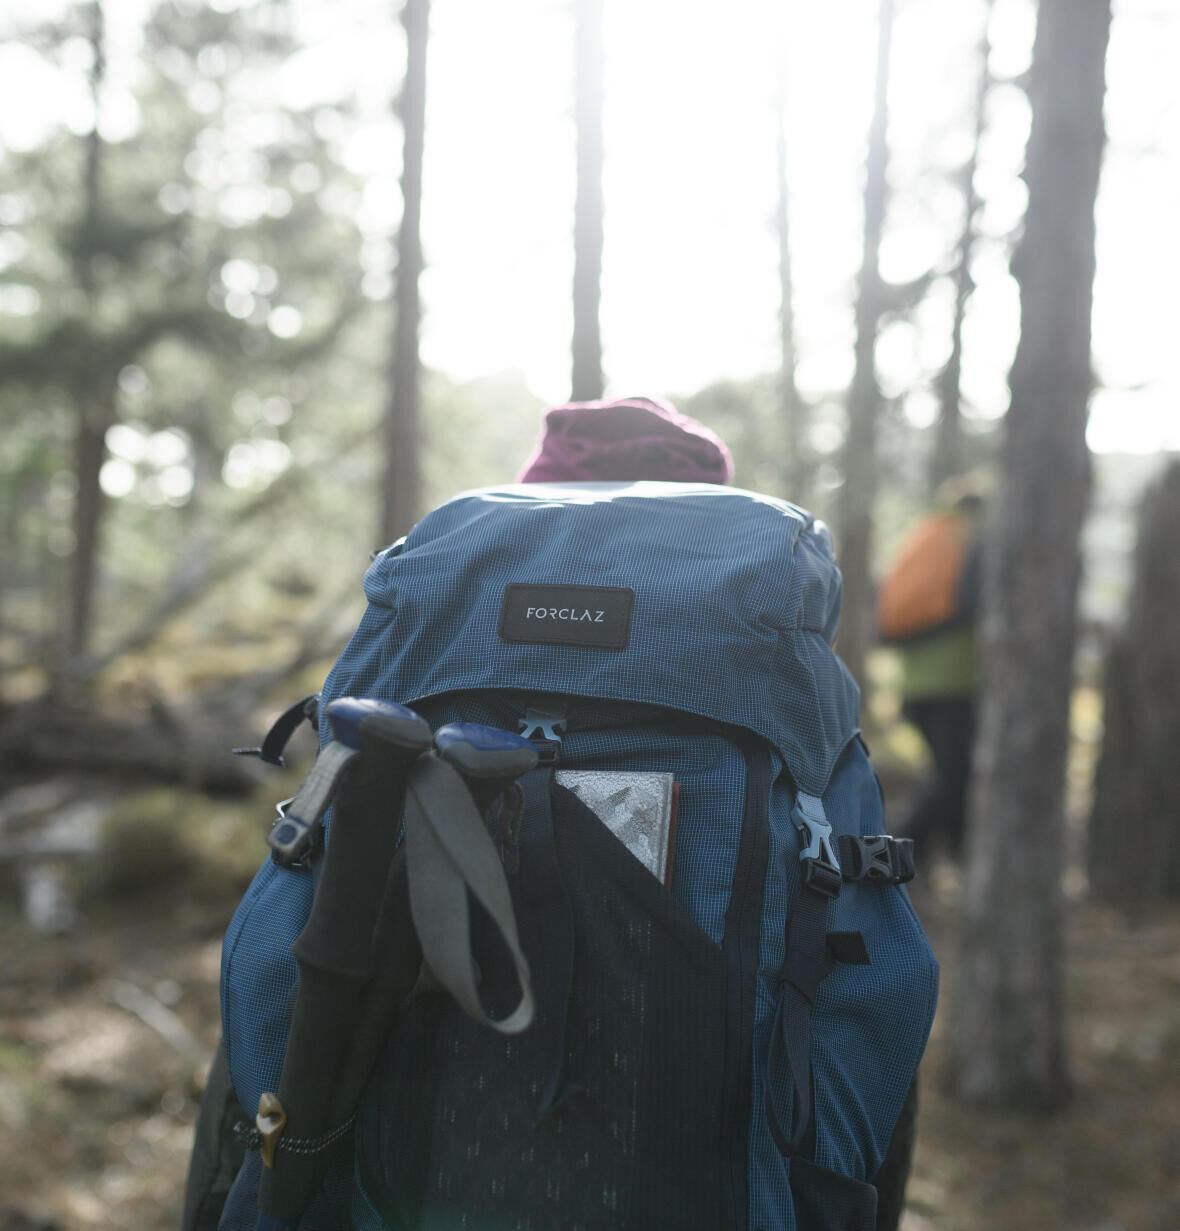 Where can you hang your MH500 hiking poles on a backpack?